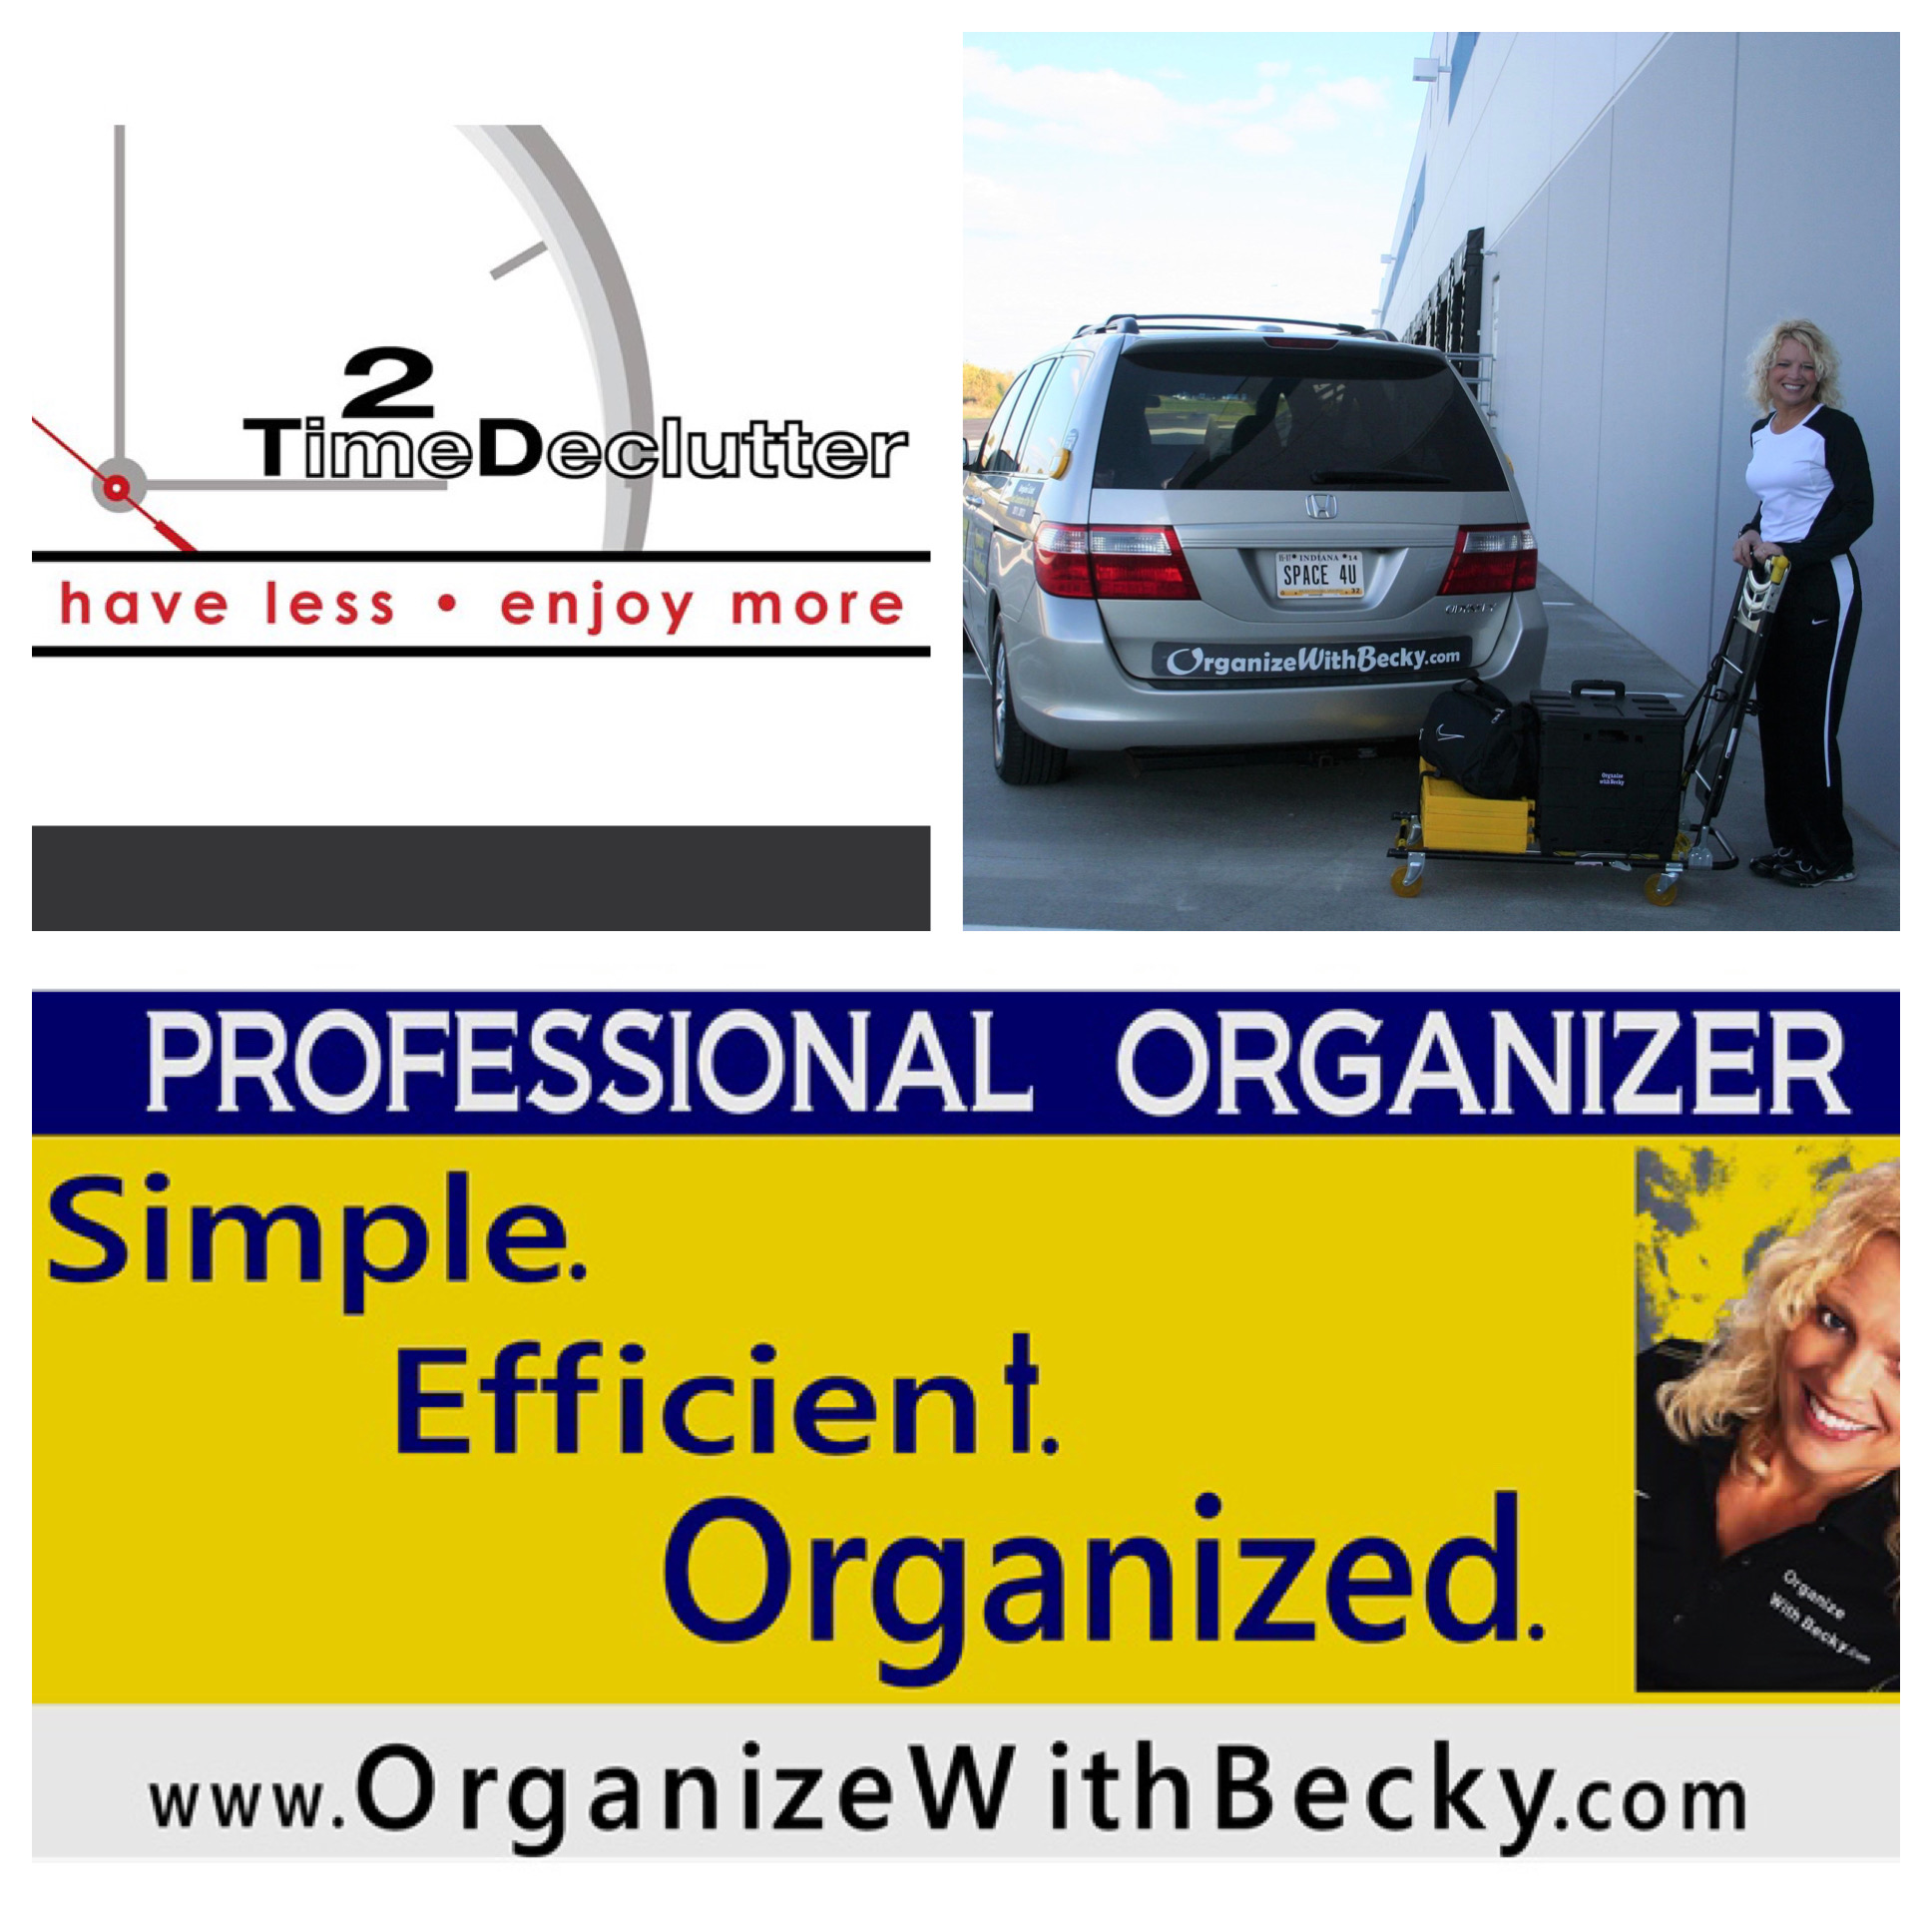 Organize With Becky business banner